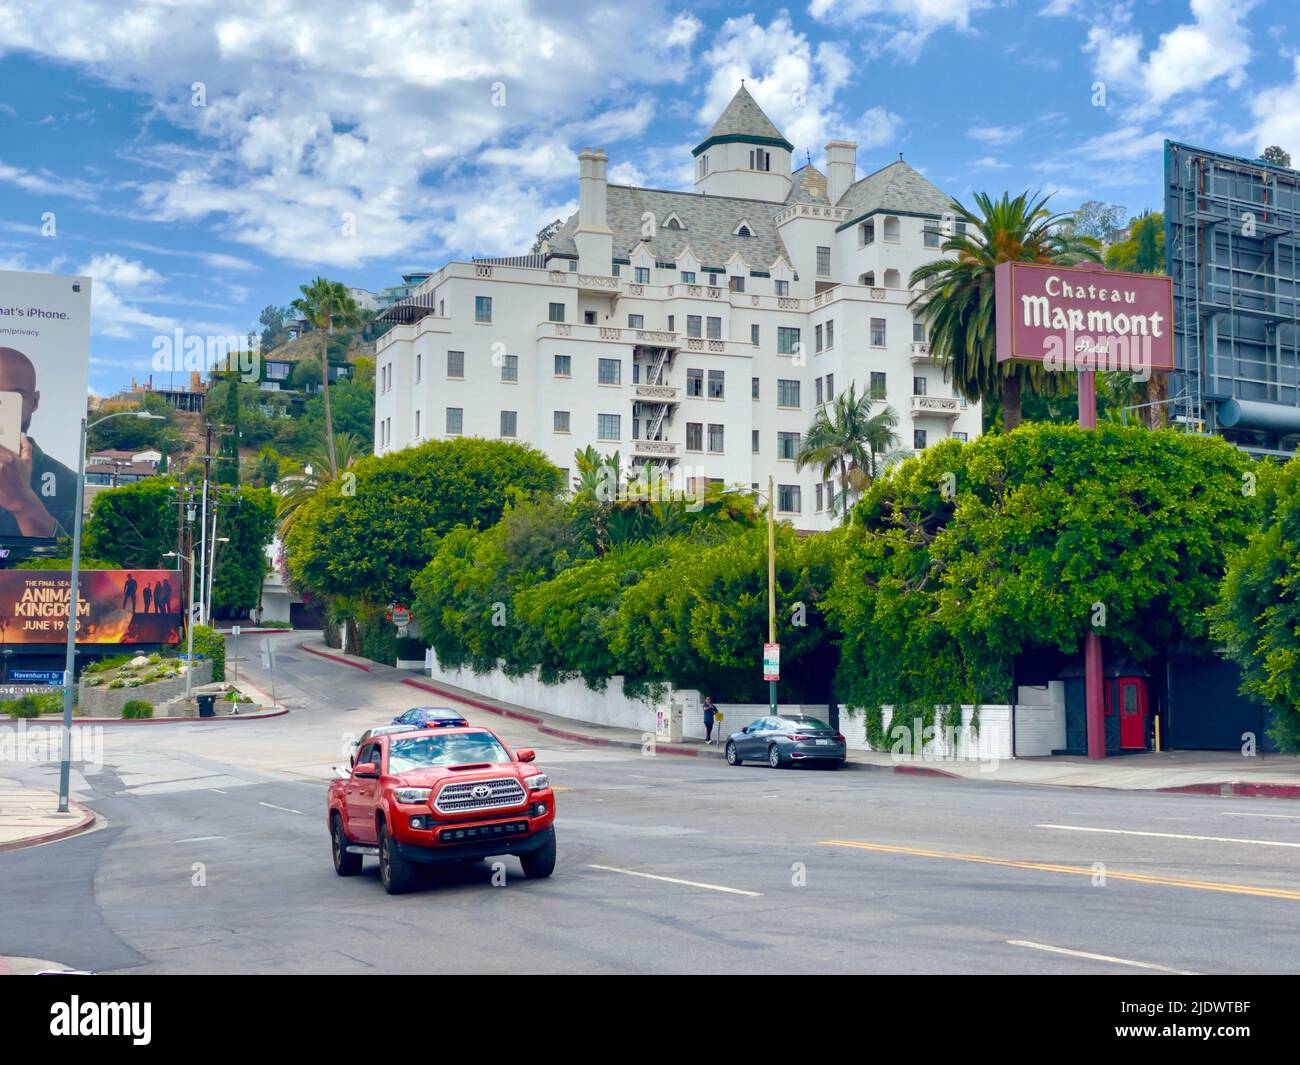 Chateau Marmont, hotel, Sunset Strip, West Hollywood, Los Angeles, CA Stock Photo